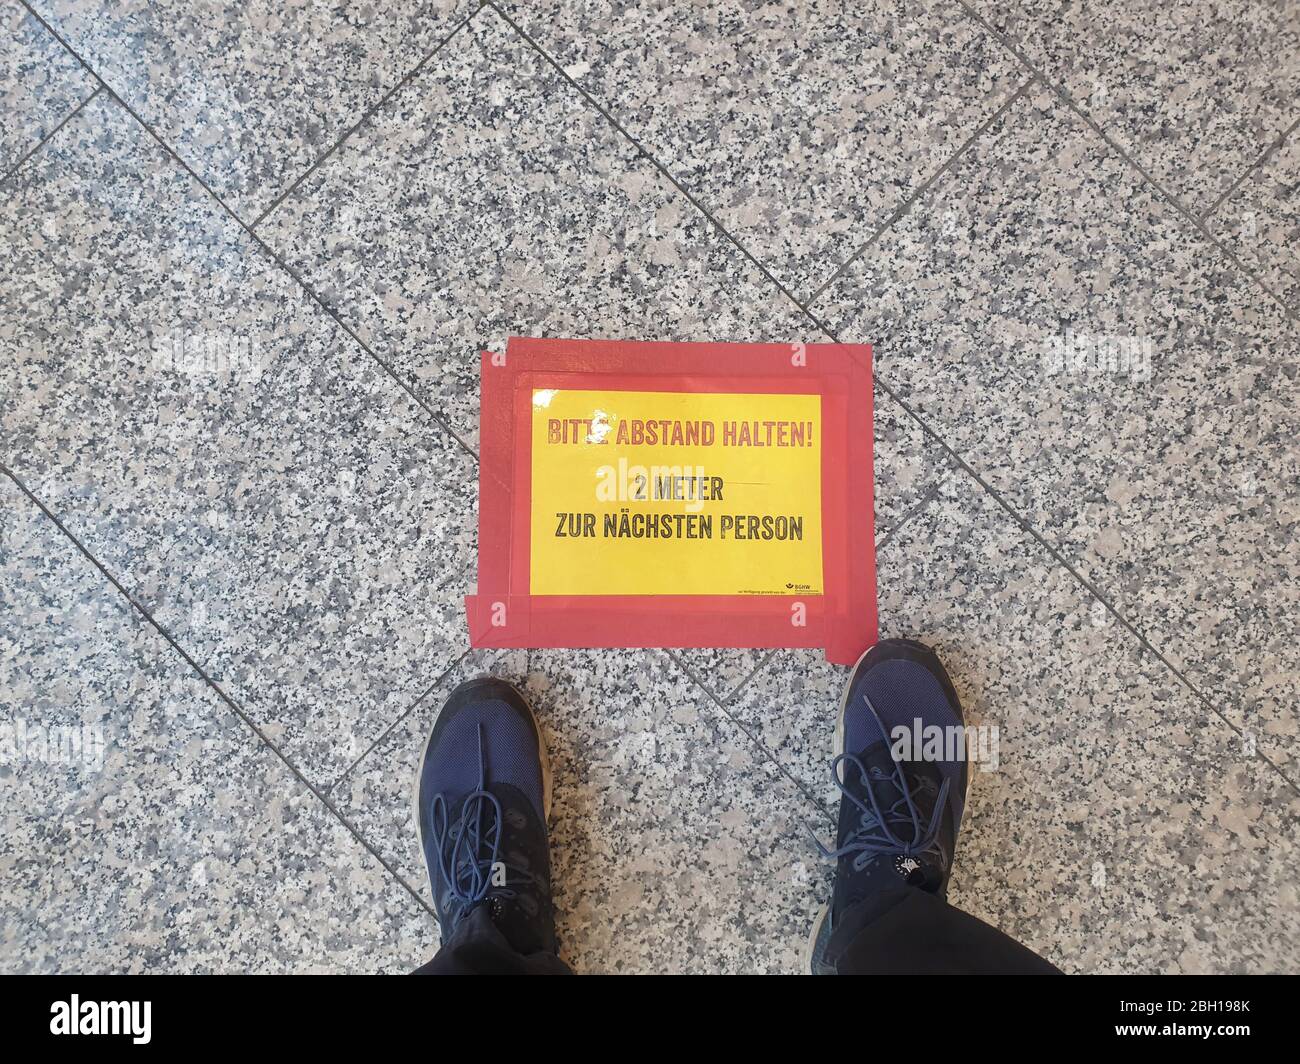 sign keep distance, Abstand halten, on the ground of a supermarket, corona crisis 2020, Germany, North Rhine-Westphalia Stock Photo